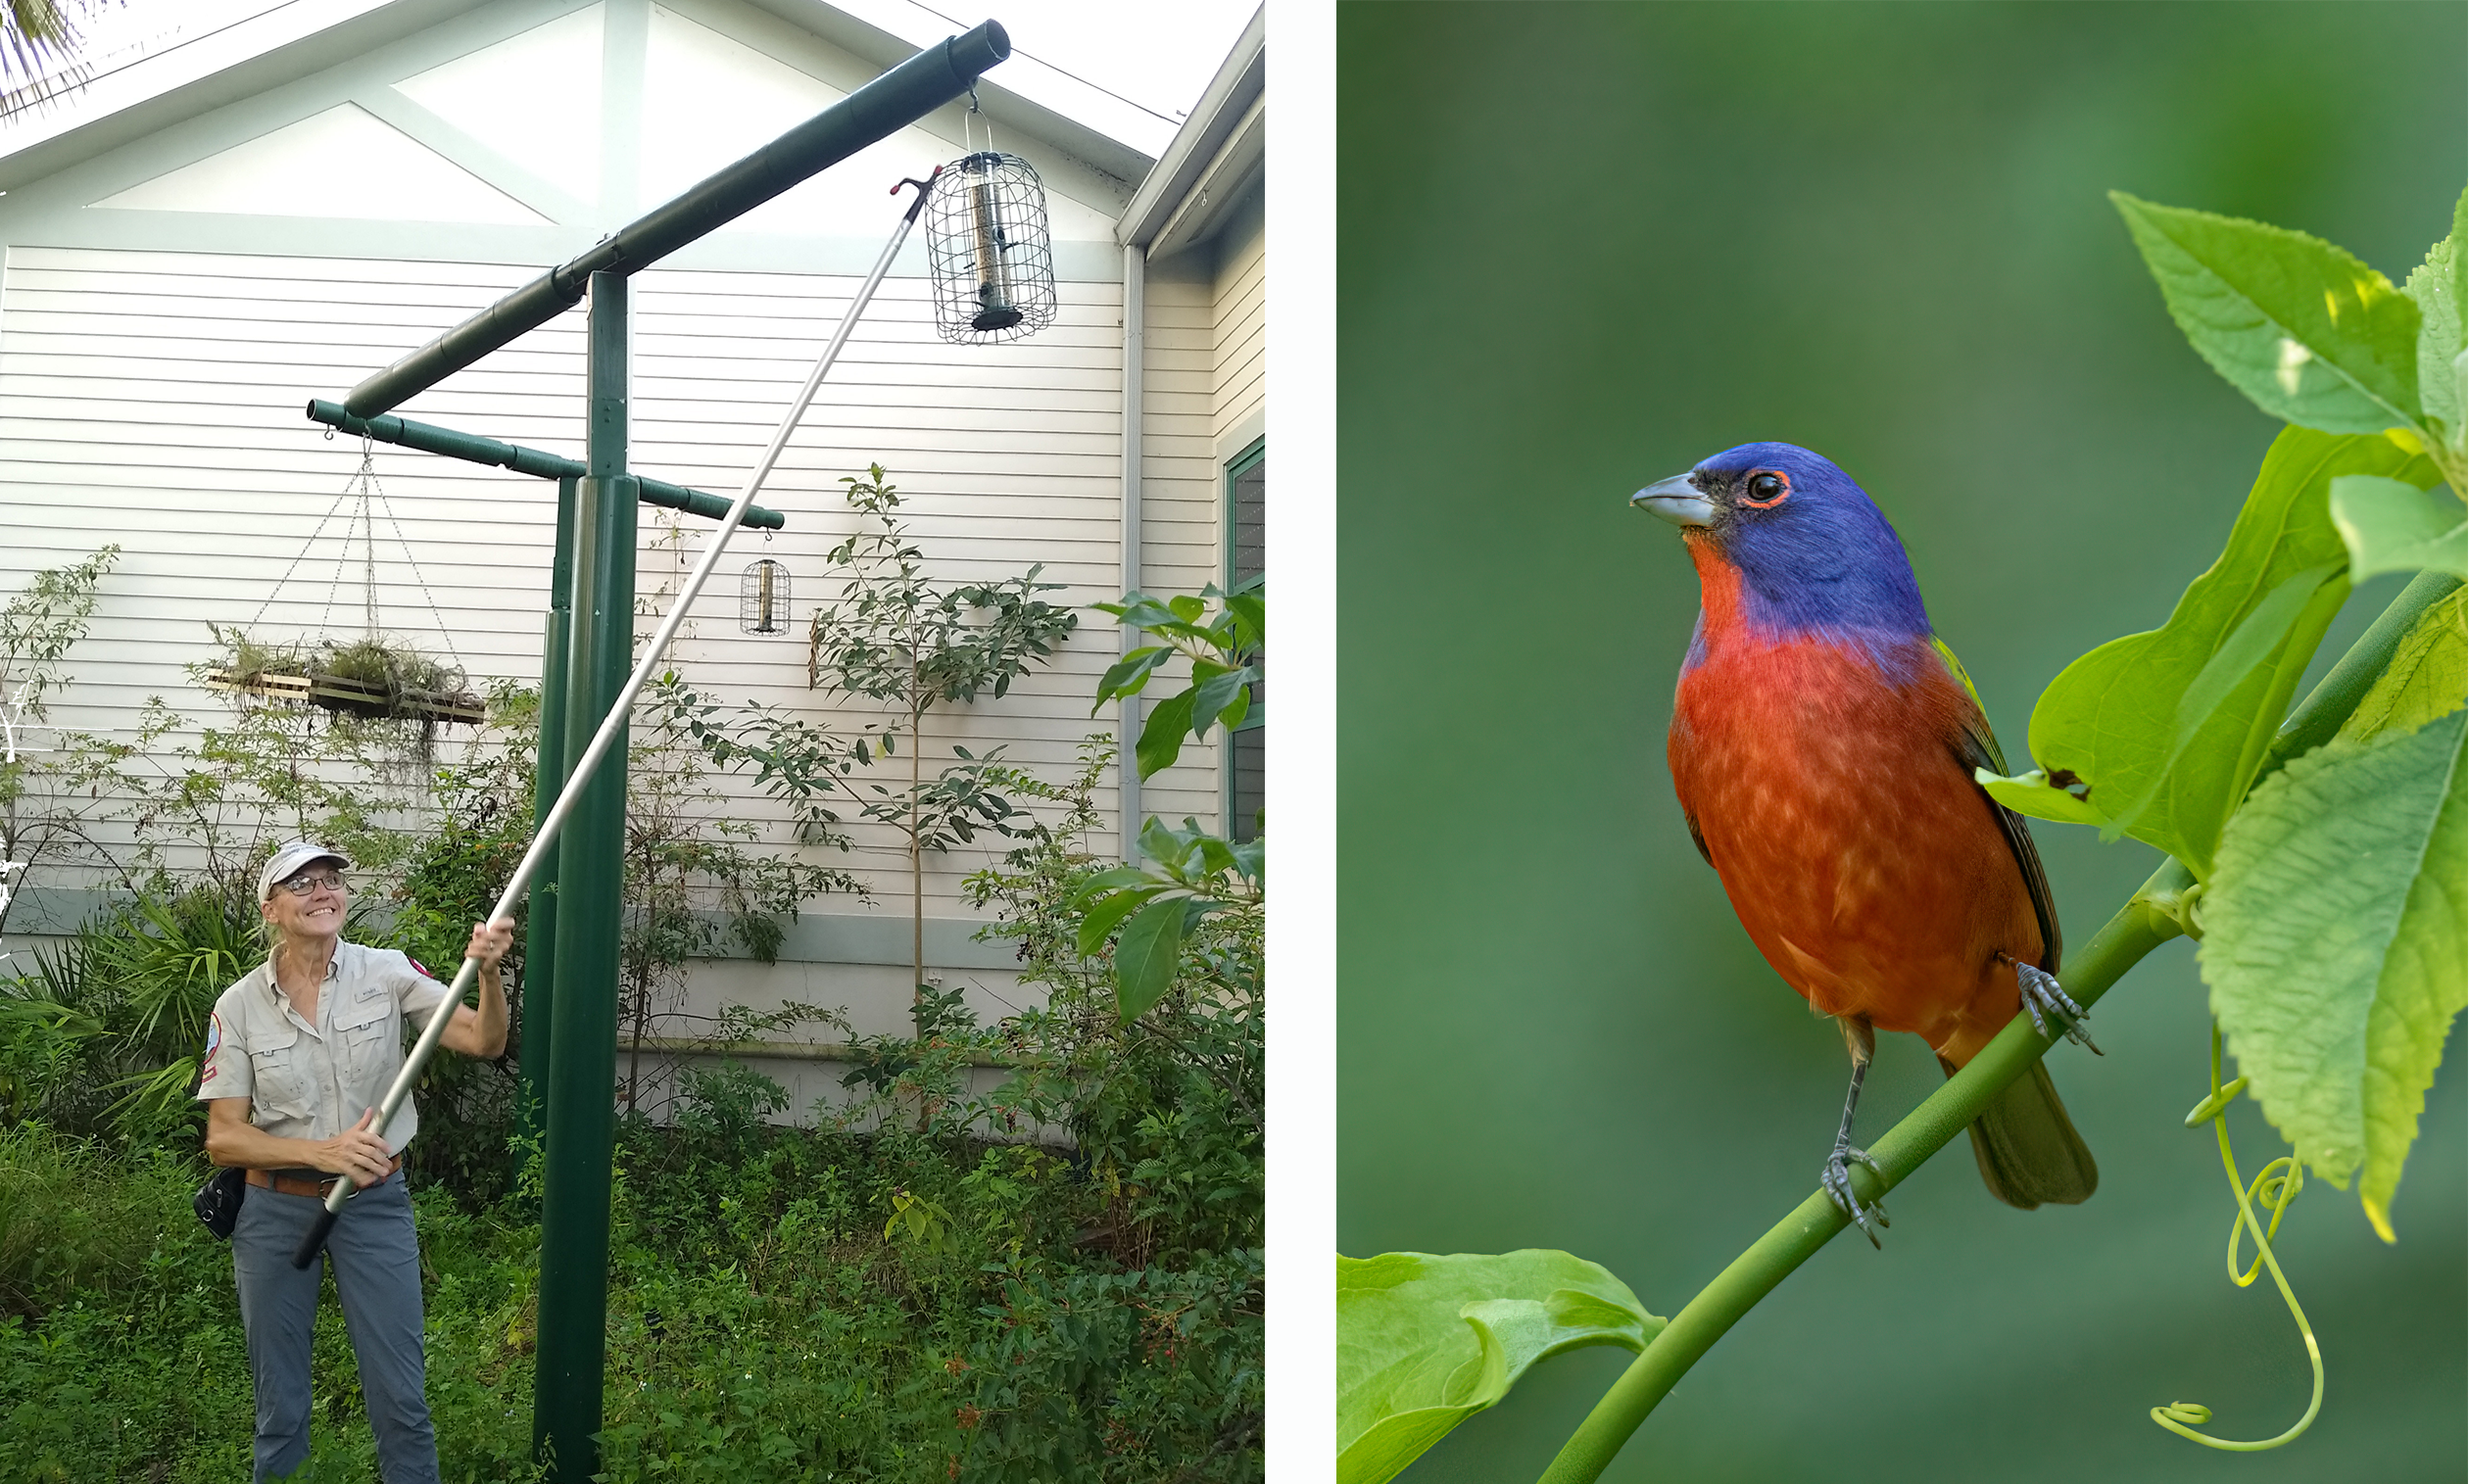 right side: a woman holding a stick. left side: a colorful bird perched on foliage